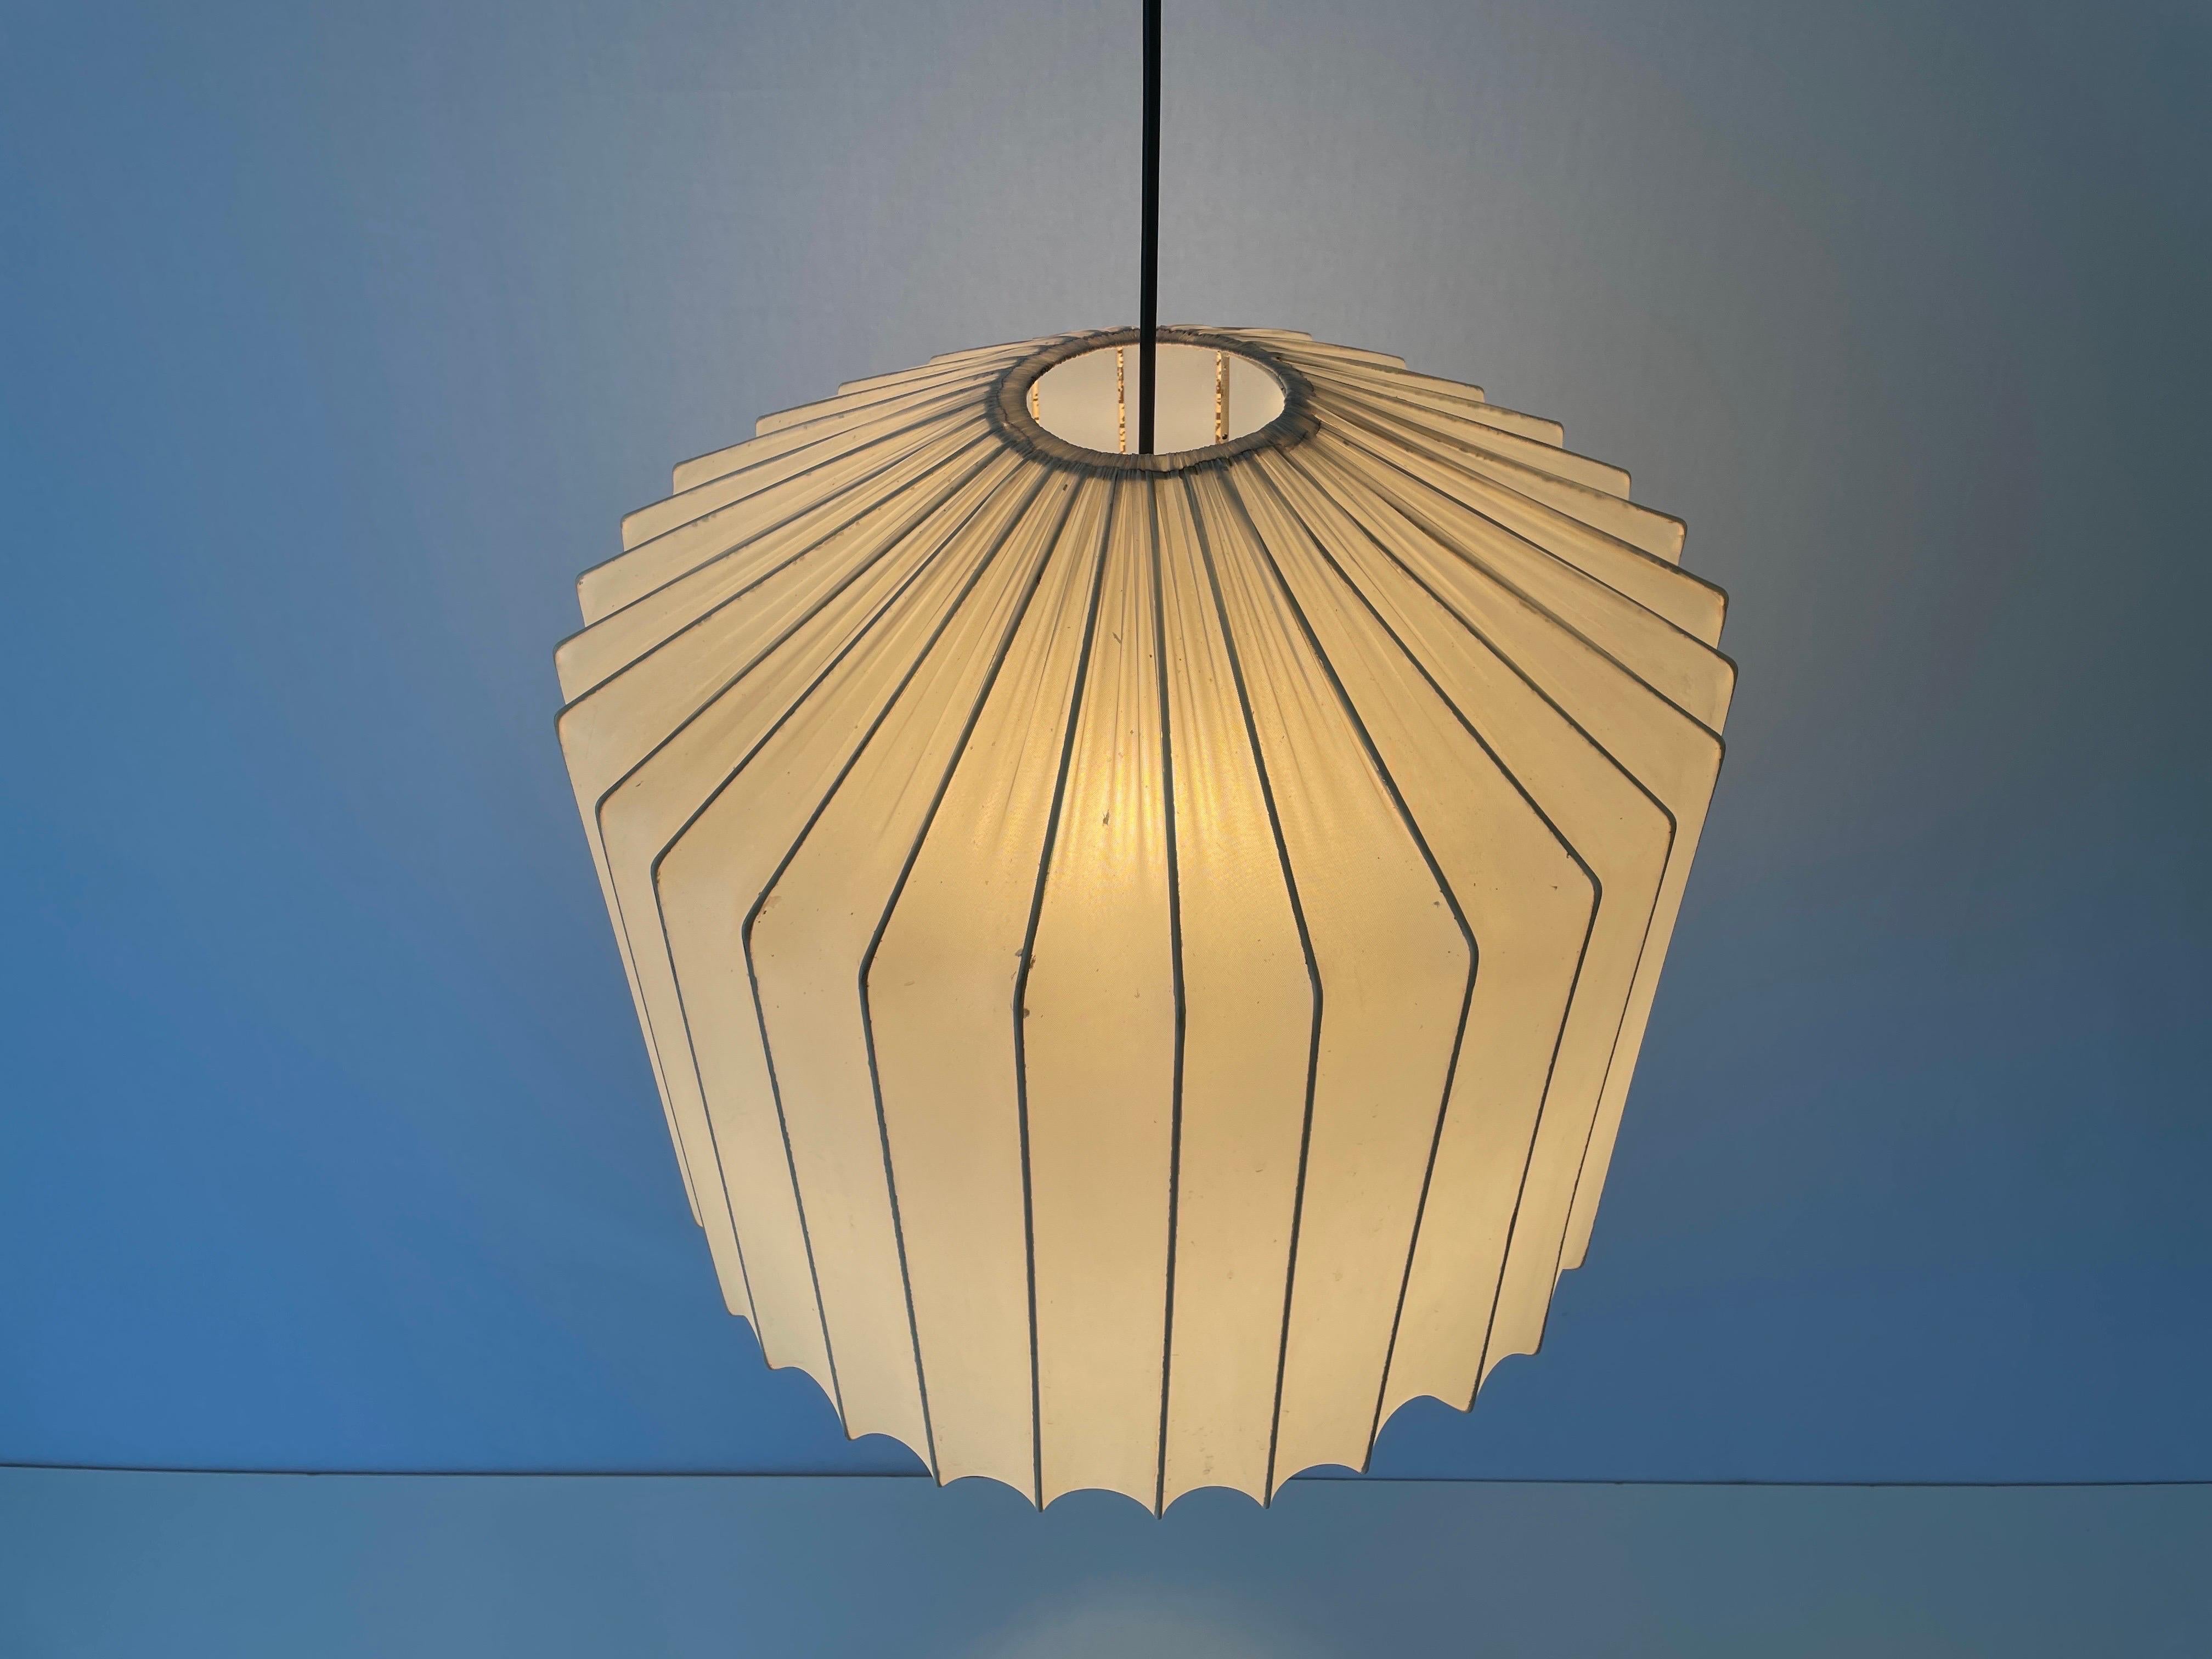 Satin Silk Fabric Ceiling Lamp in Cocoon Shape, 1960s, Italy For Sale 4